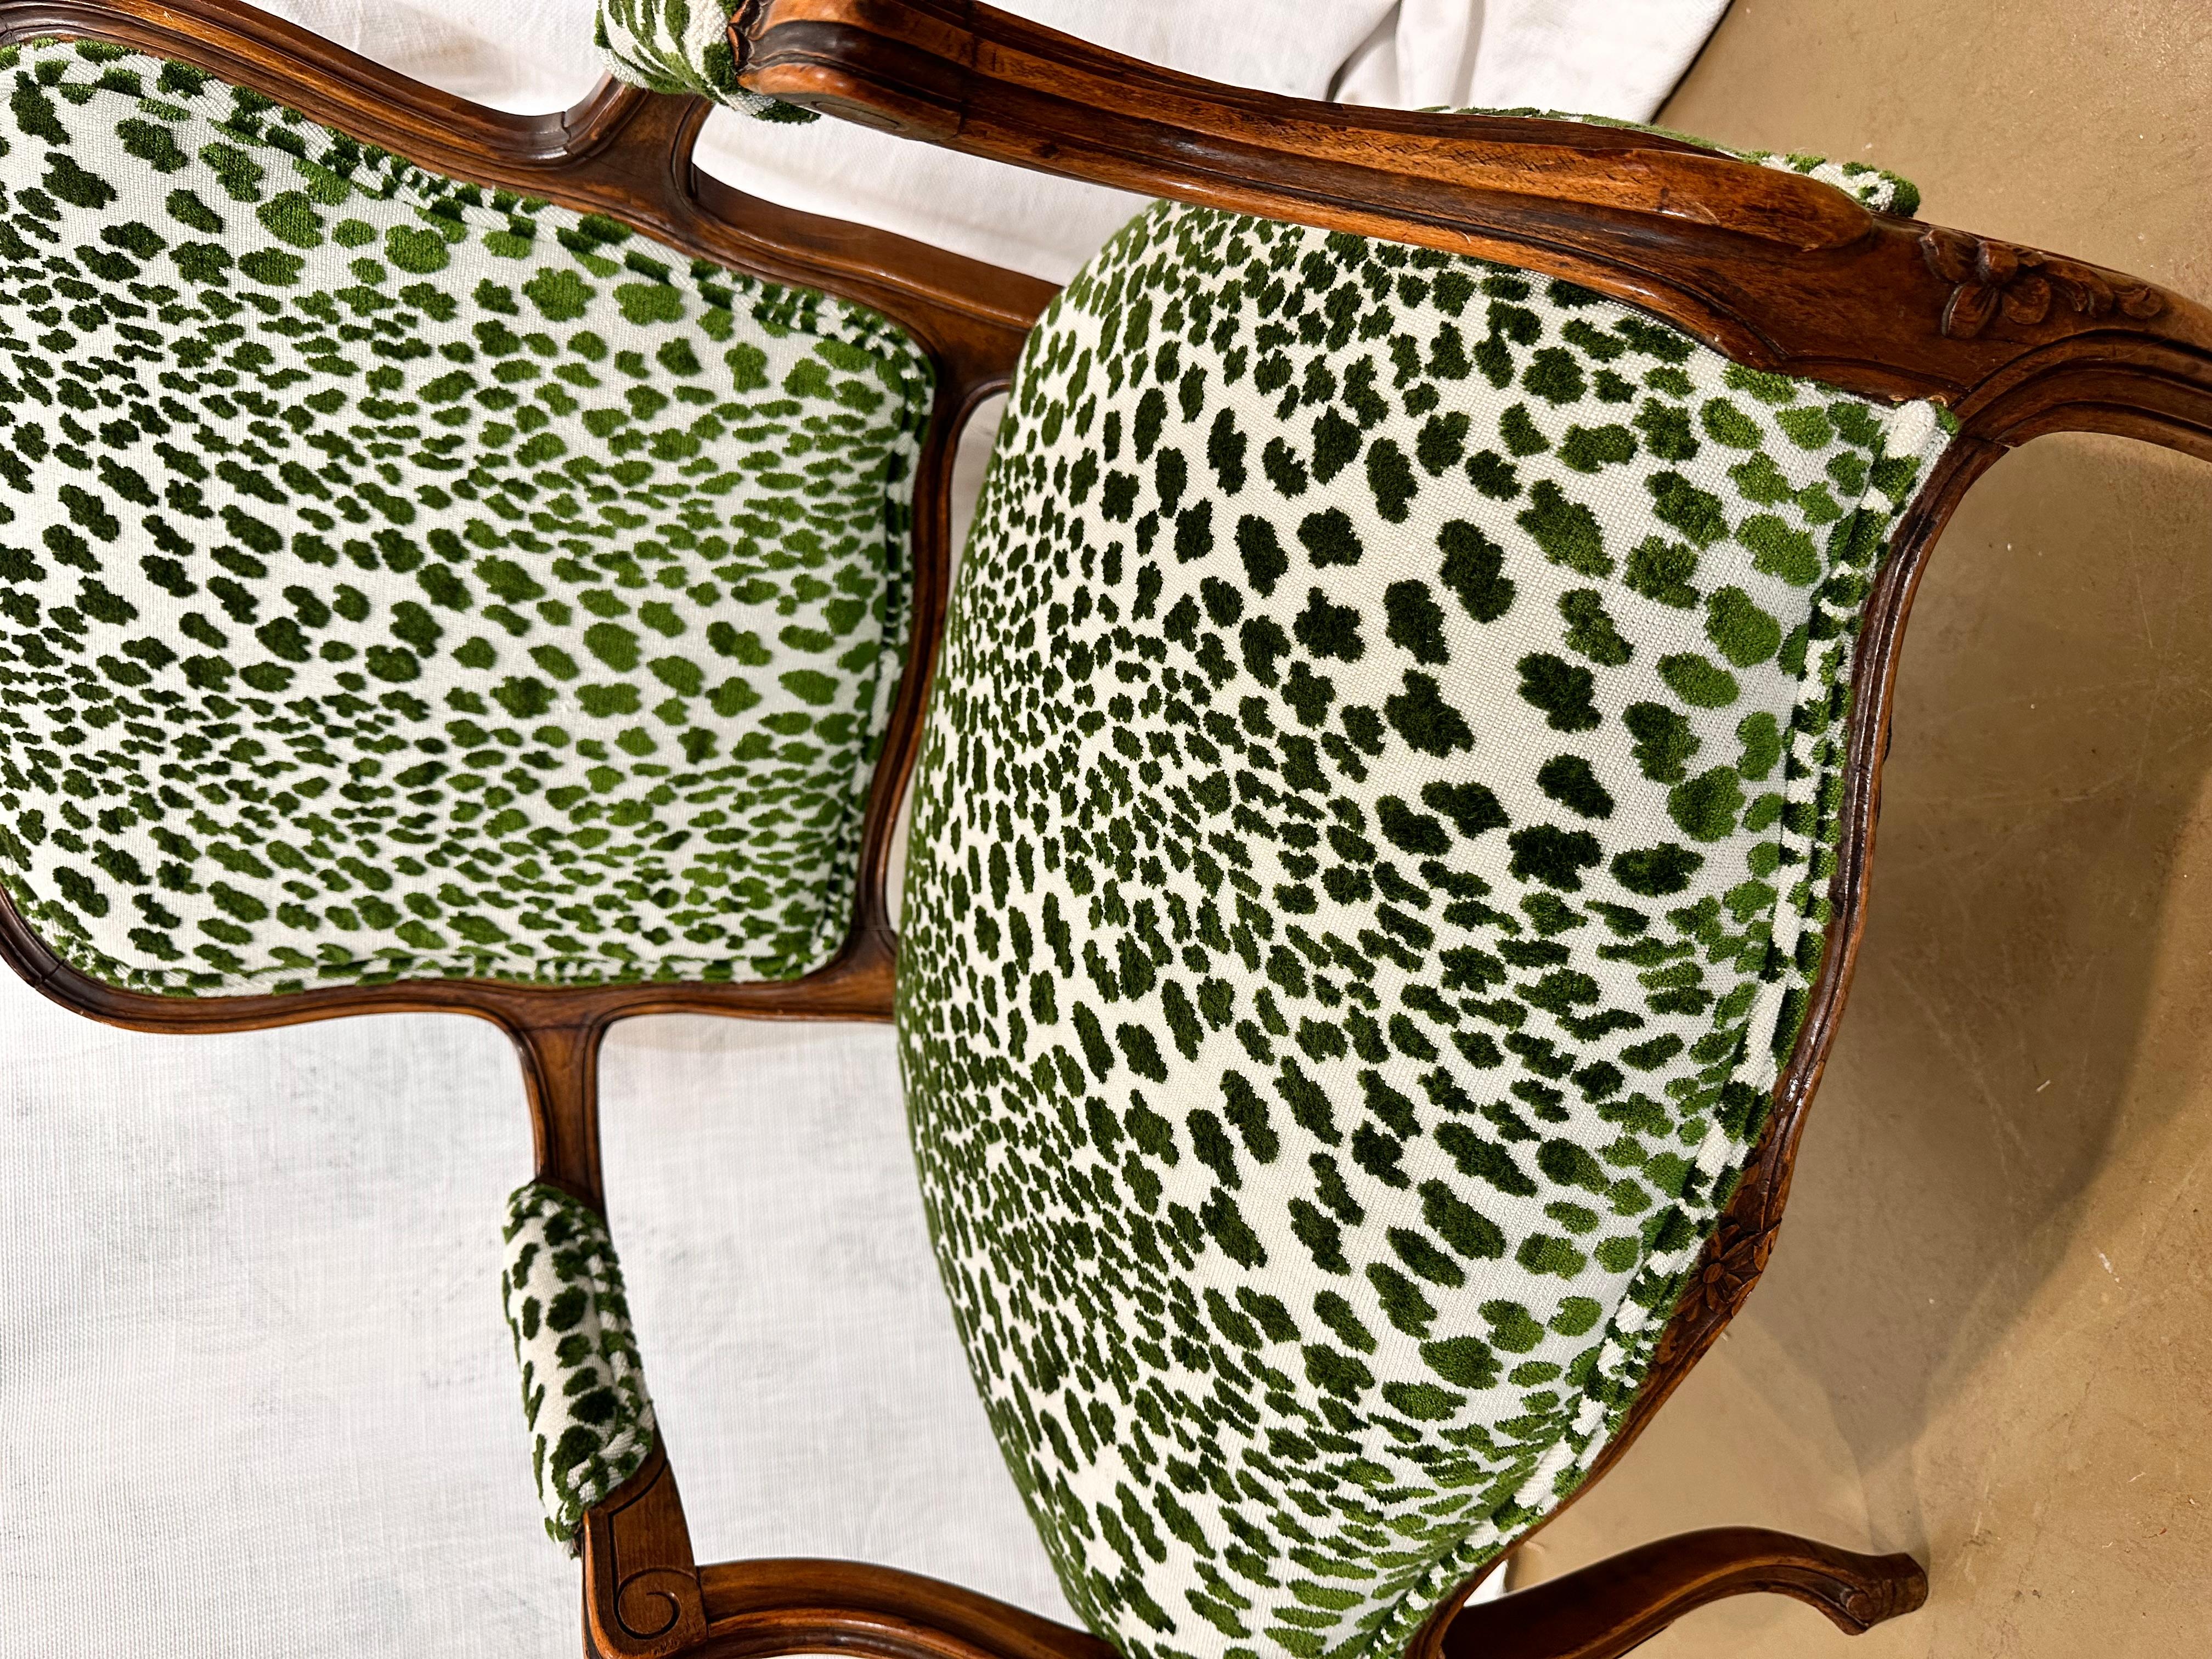 This is a beautiful, antique upholstered chair! It has been newly reupholstered in a vibrant green leopard print fabric that pairs wonderfully with the dark wood. The arms and legs have stunning hand carved designs that are immediately eye-catching.